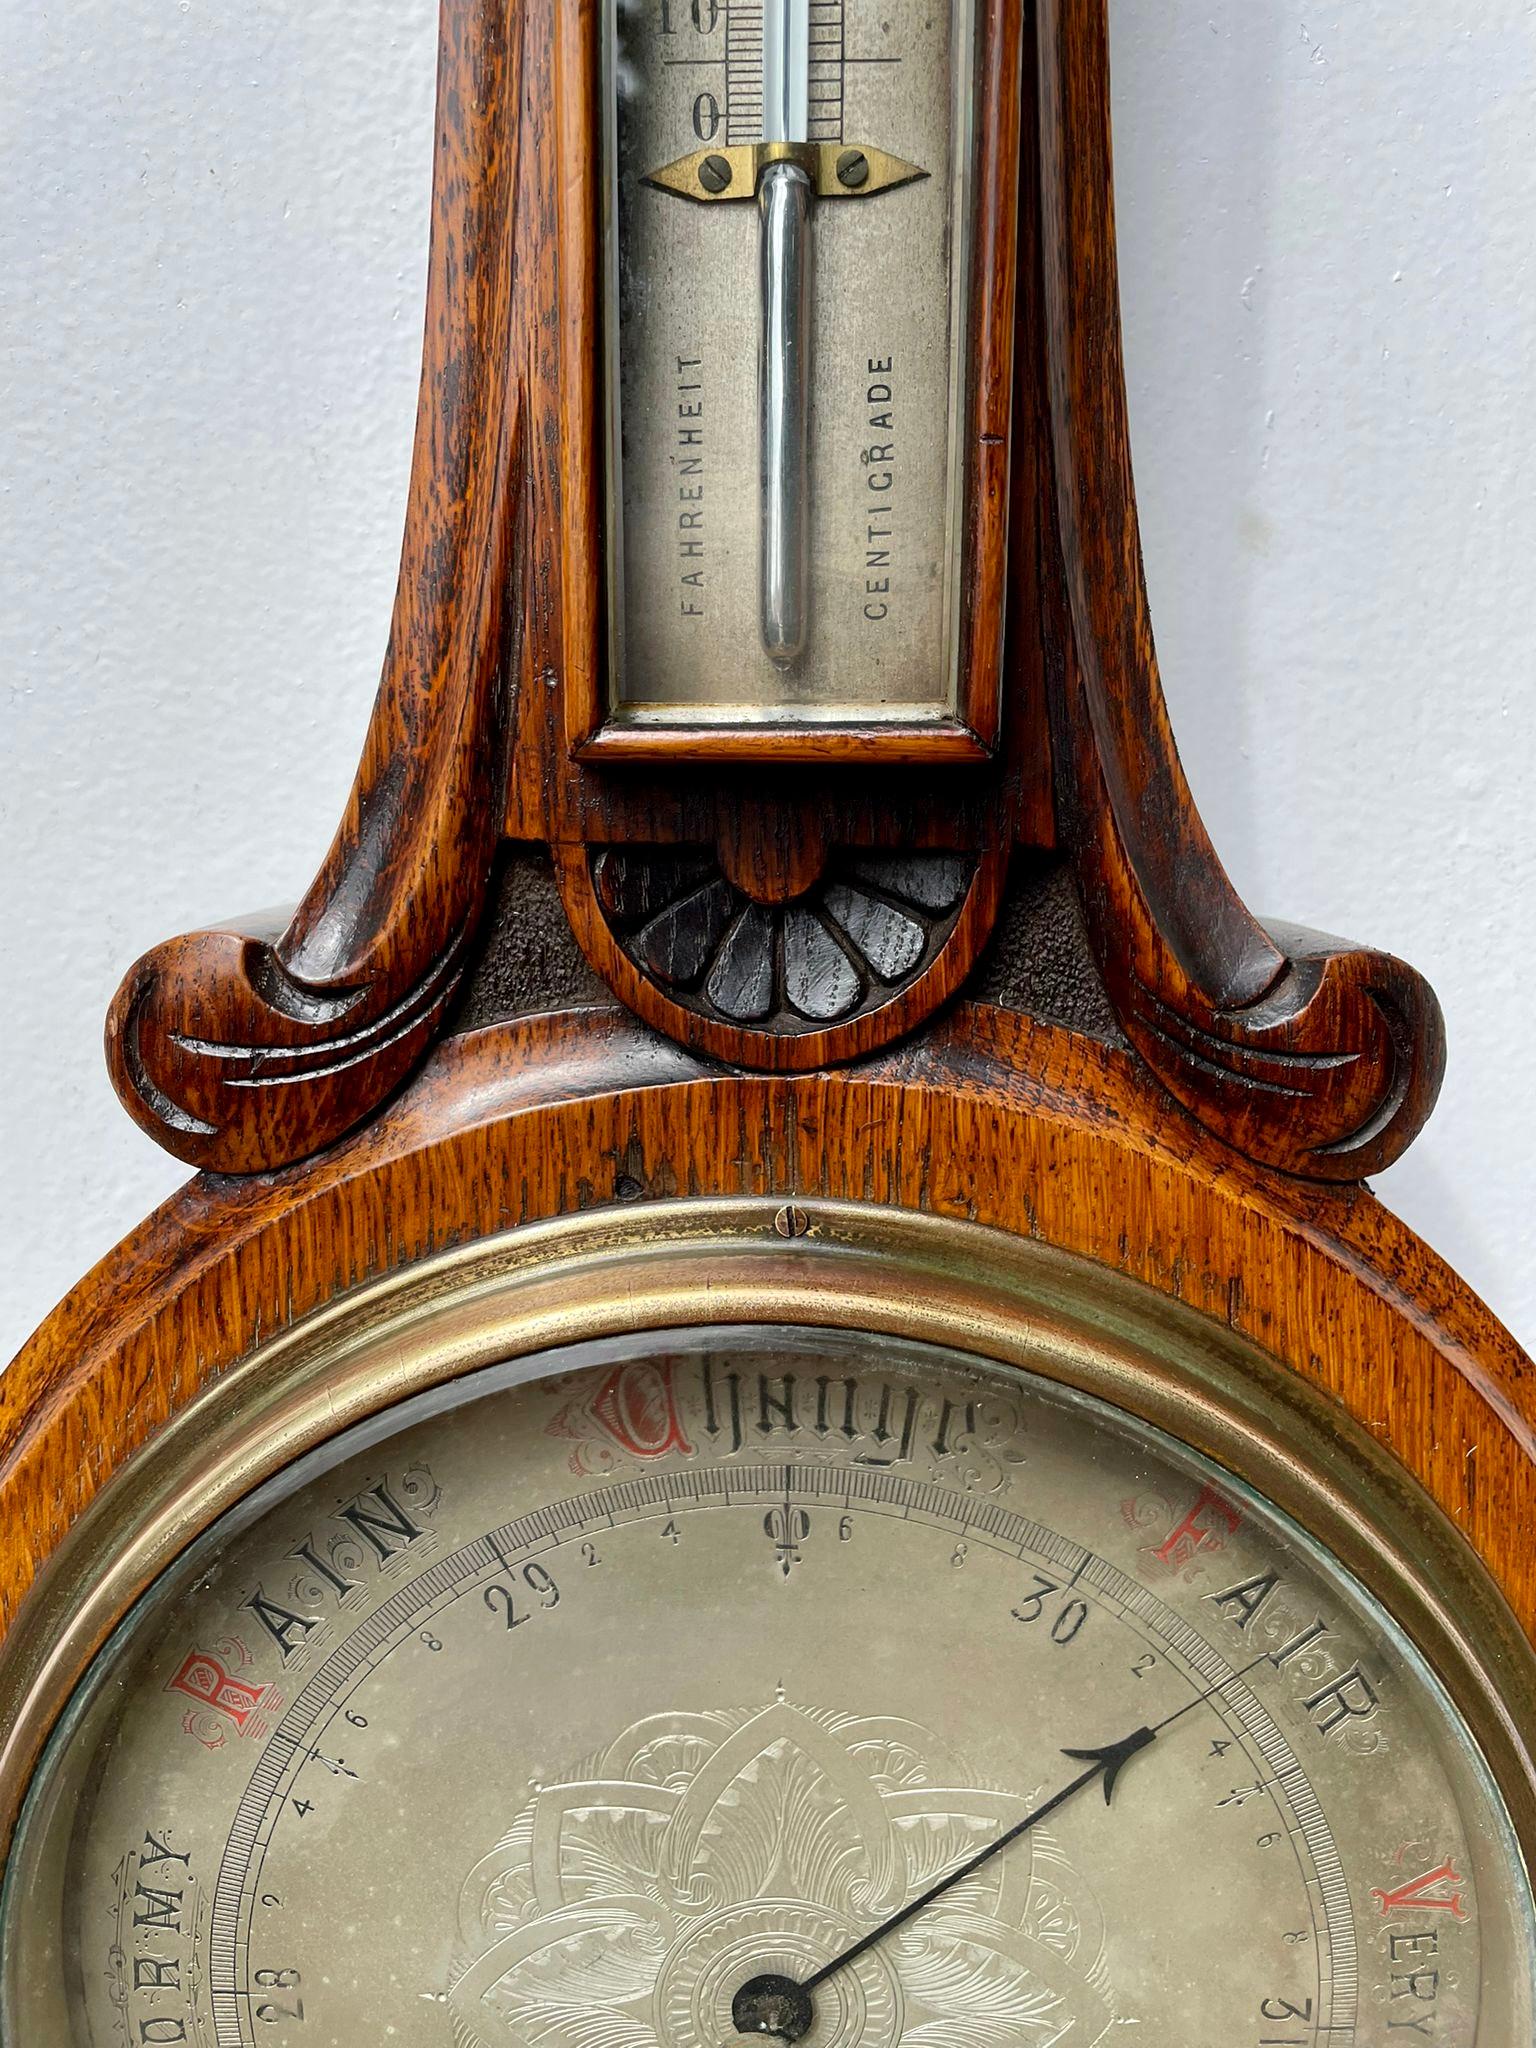 Antique carved oak banjo barometer having a carved oak shaped case with a thermometer and a 9 inch pretty silver engraved dial, original hands and brass bezel.

Lovely condition and in good working order.

Measures: H 85cm
W 27cm 
D